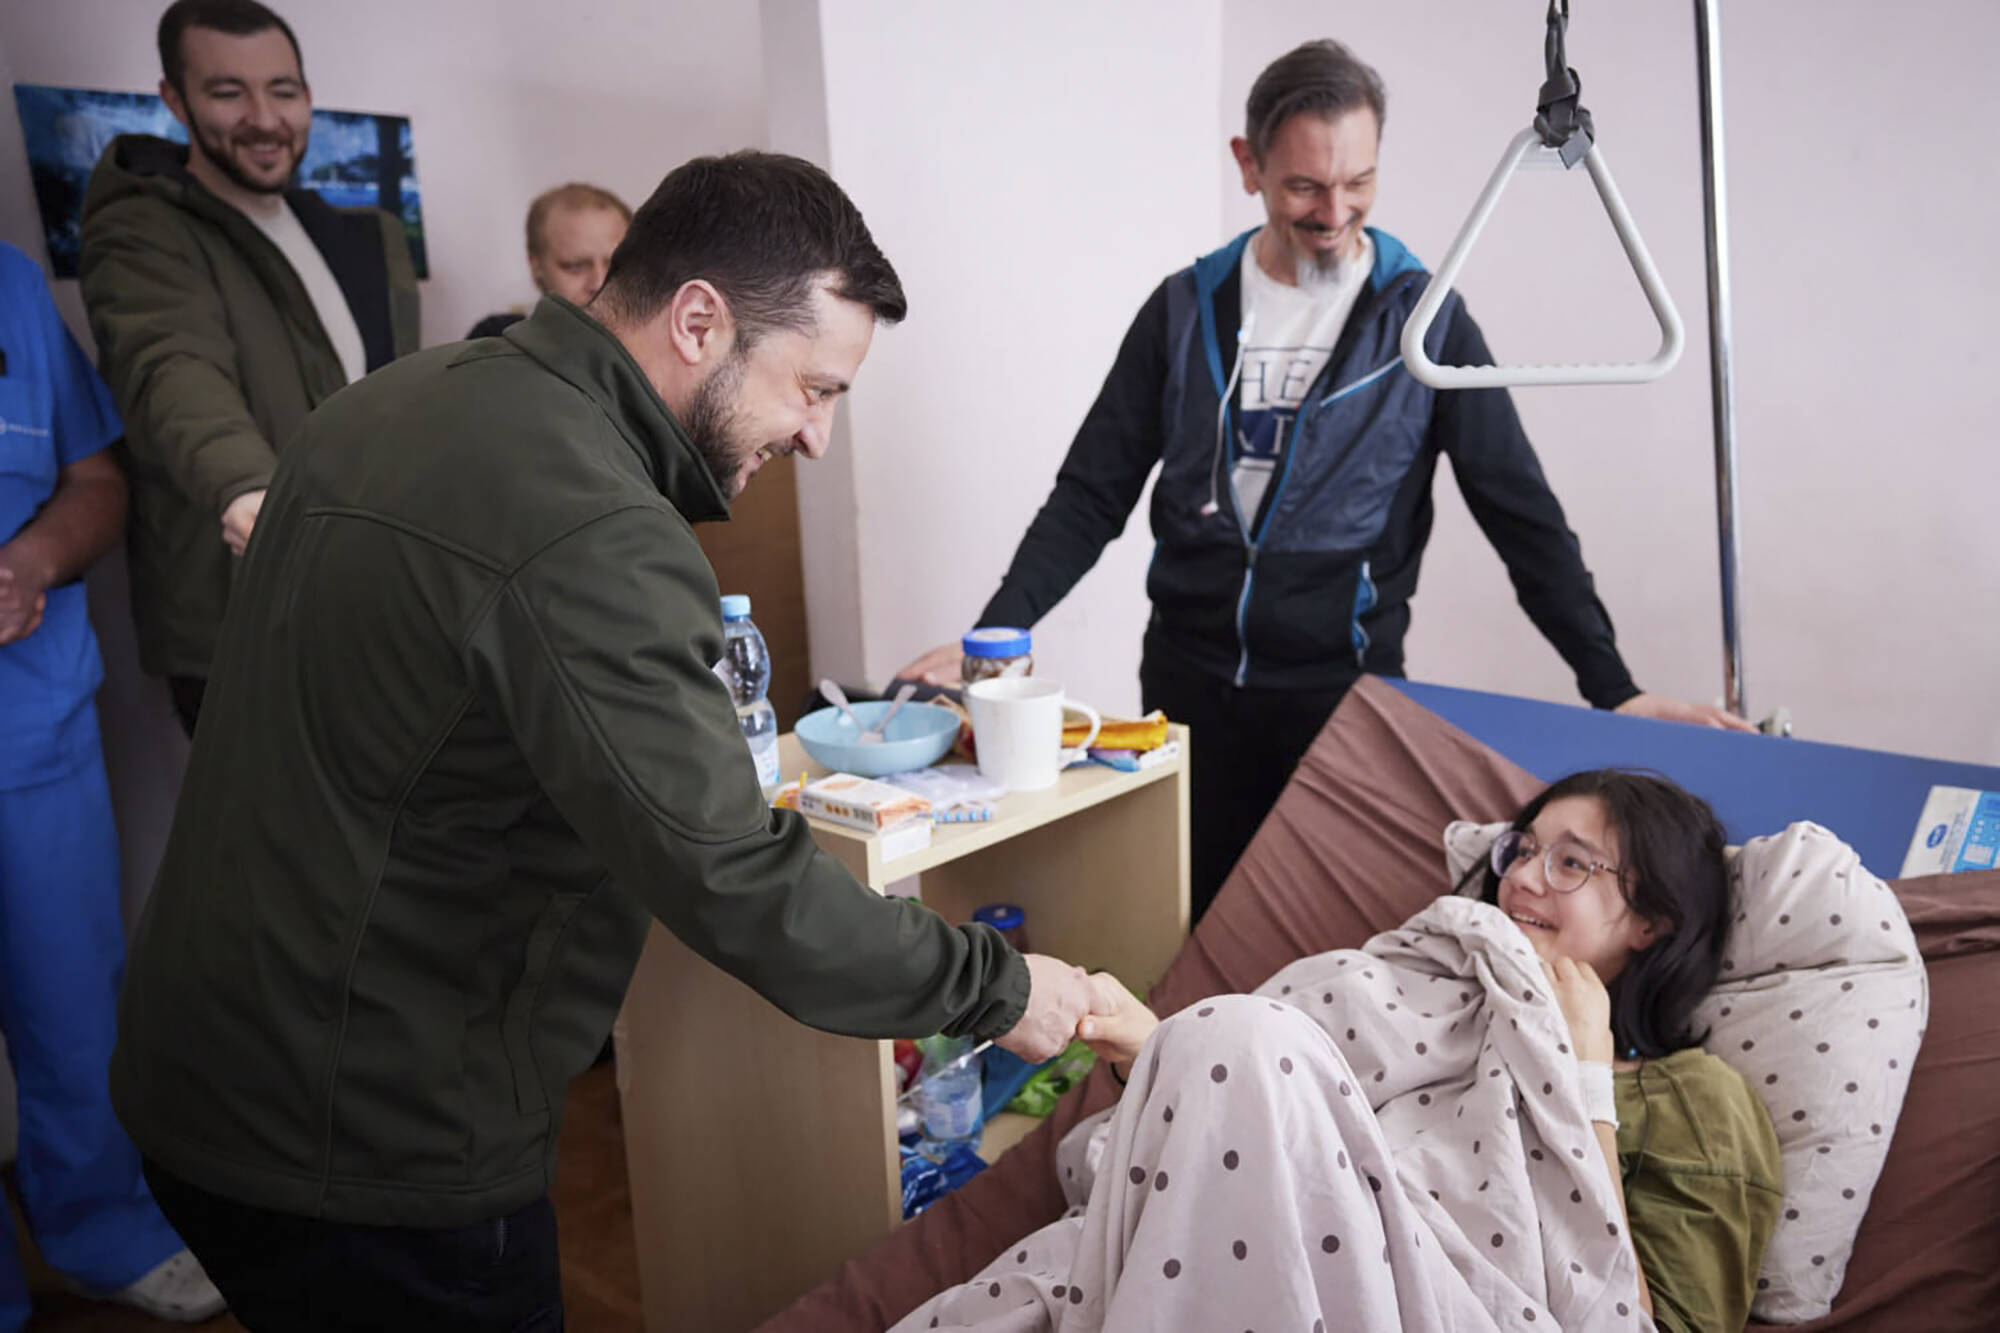 In this photo provided by the Ukrainian Presidential Press Office on Thursday, March 17, 2022, President Volodymyr Zelenskyy, shakes hands with a wounded Kateryna Vlasenko, 16, a refugee from Vorzel who covered her junior brother with her body during Russian shelling as they ran from their home town in a hospital in Kyiv, Ukraine. (Ukrainian Presidential Press Office via AP)